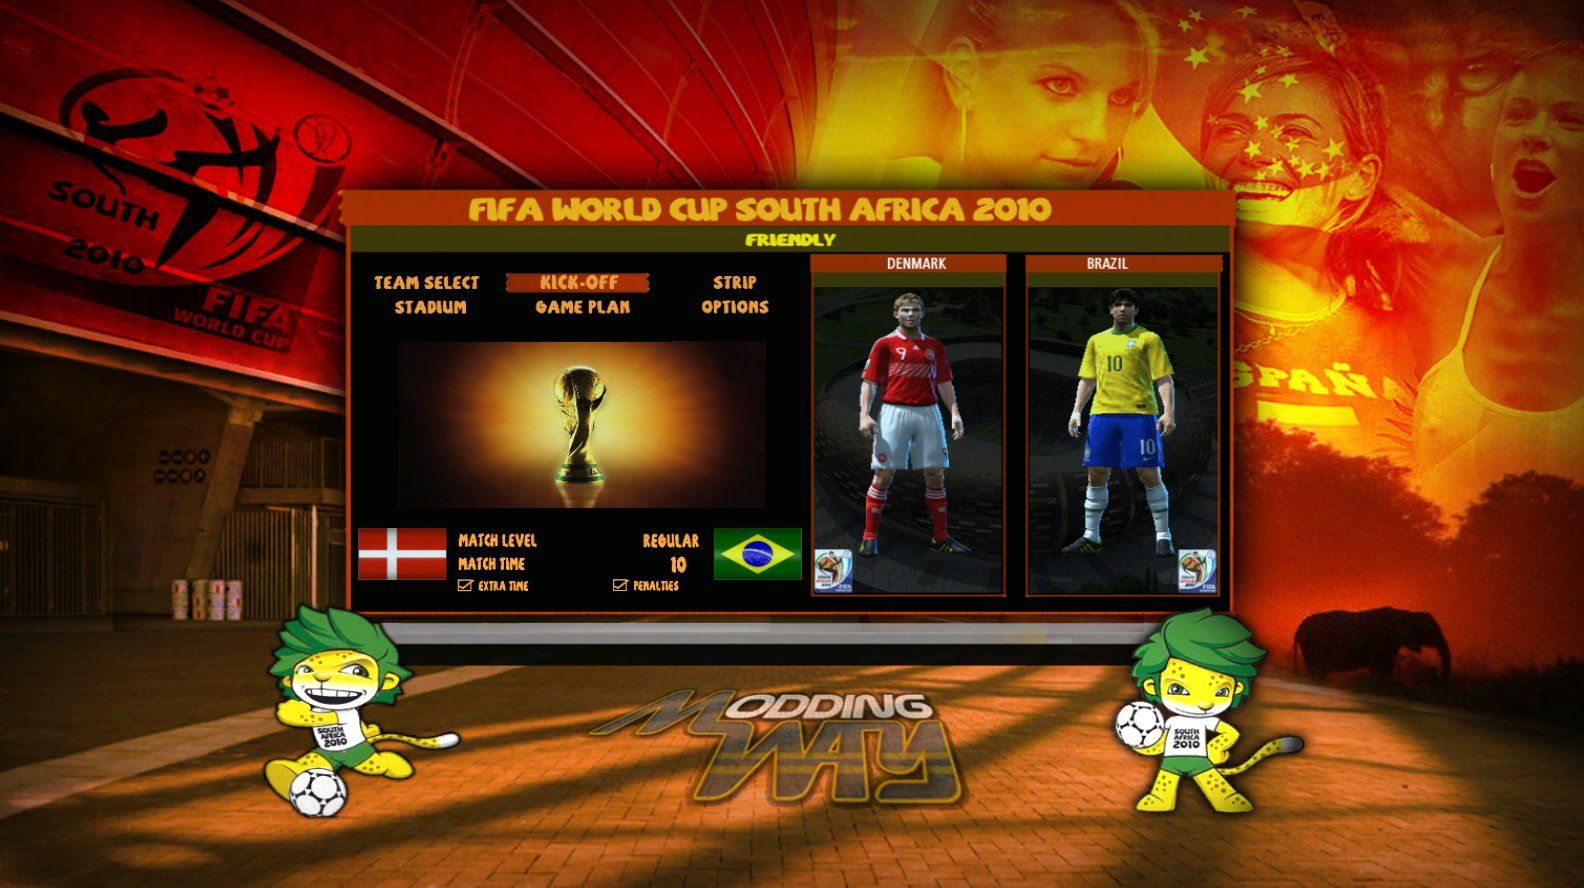 Ball Euro 2012 for pes2012 by amir7 - Pro Evolution Soccer 2012 at  ModdingWay